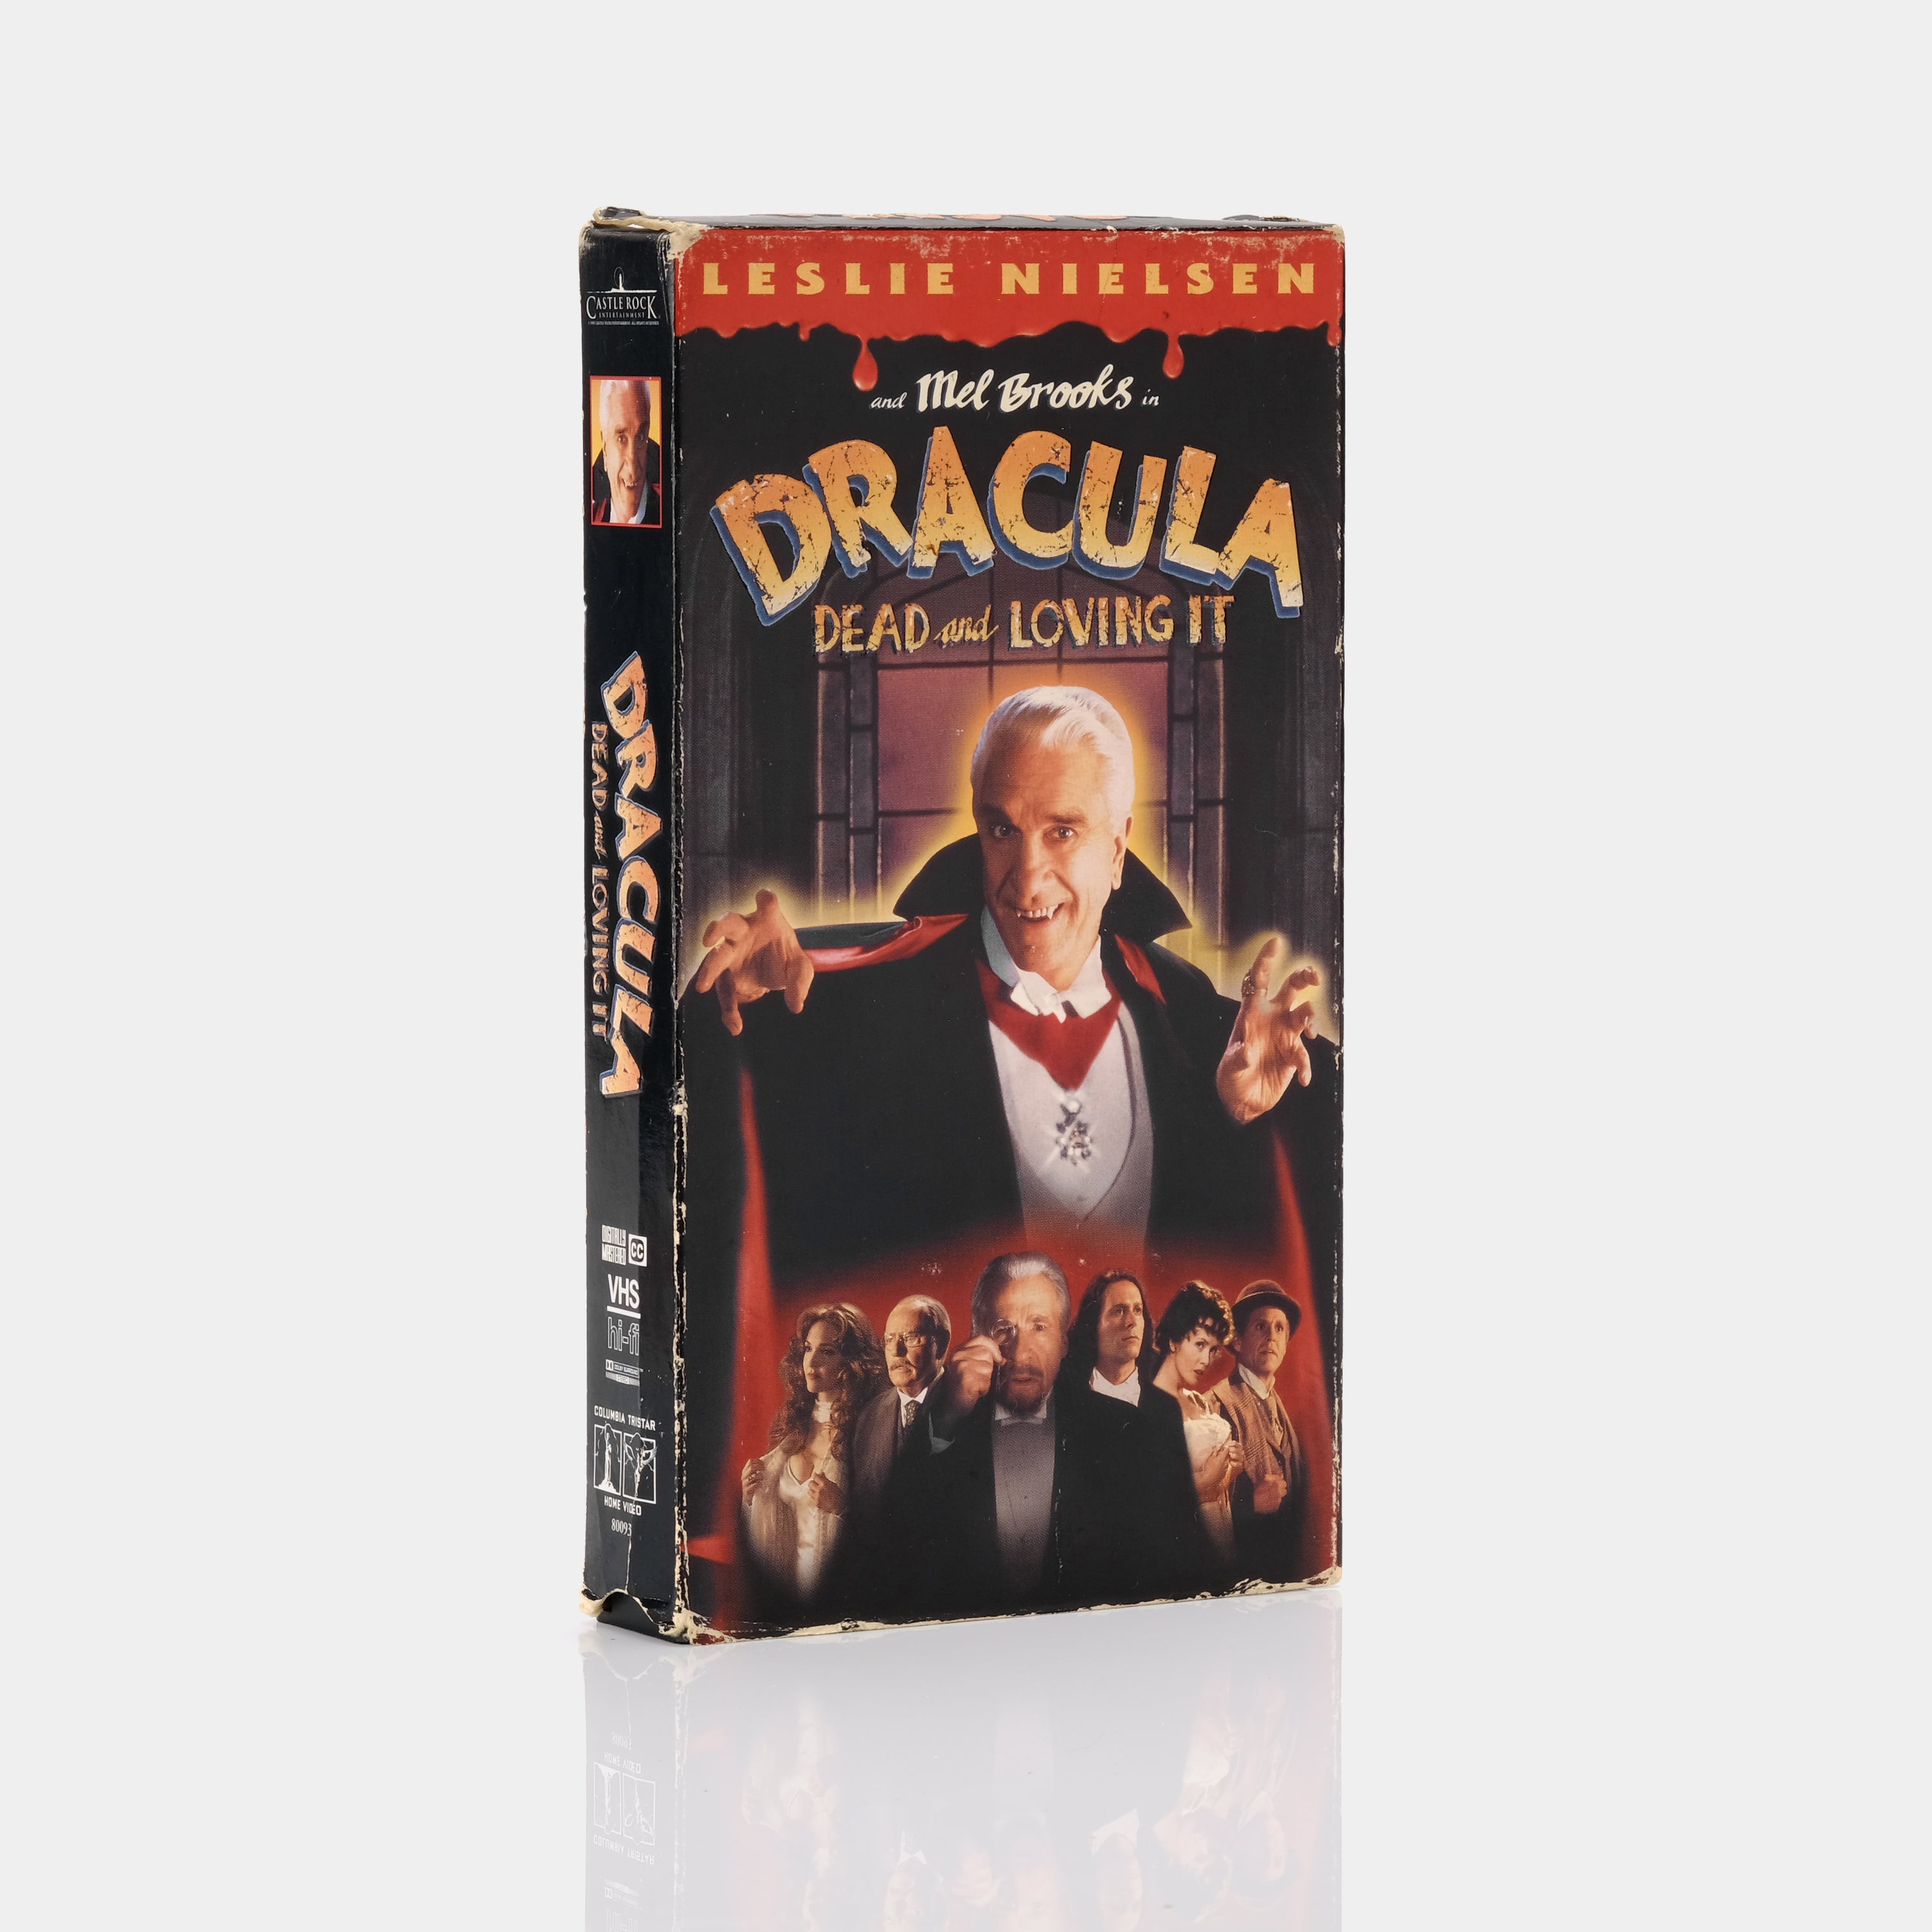 Dracula Dead And Loving It VHS Tape